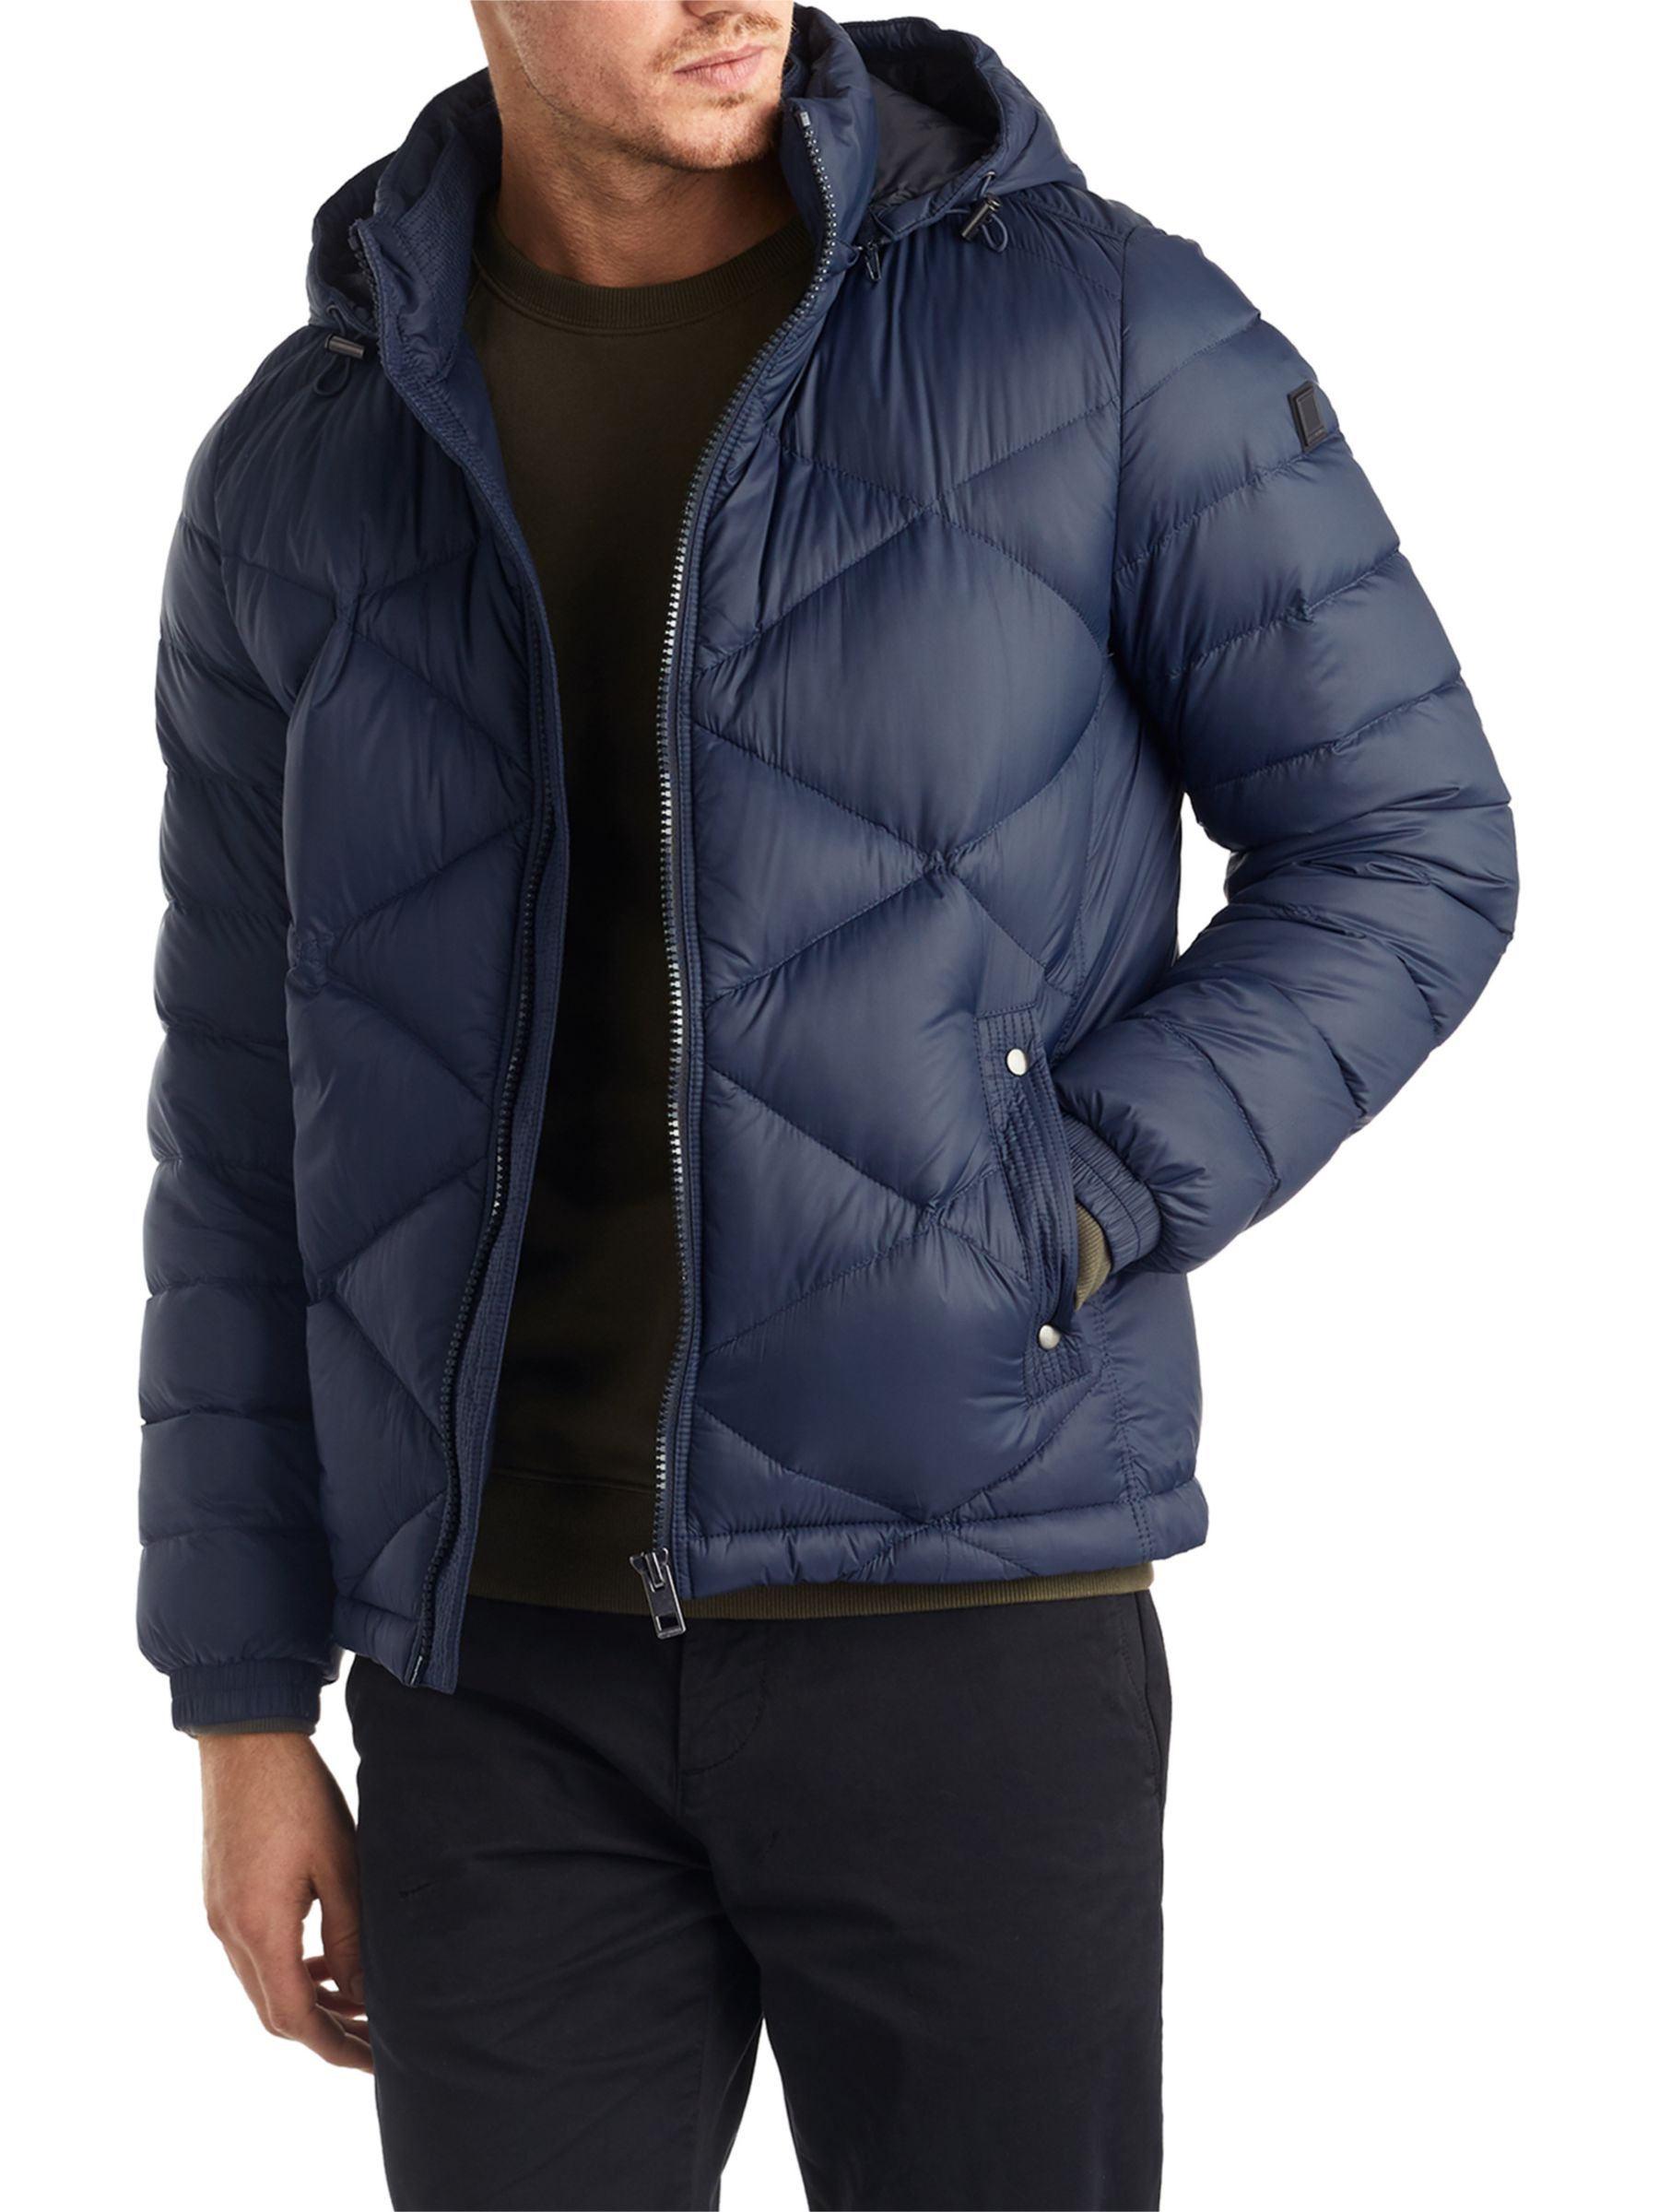 hugo boss mens quilted jacket